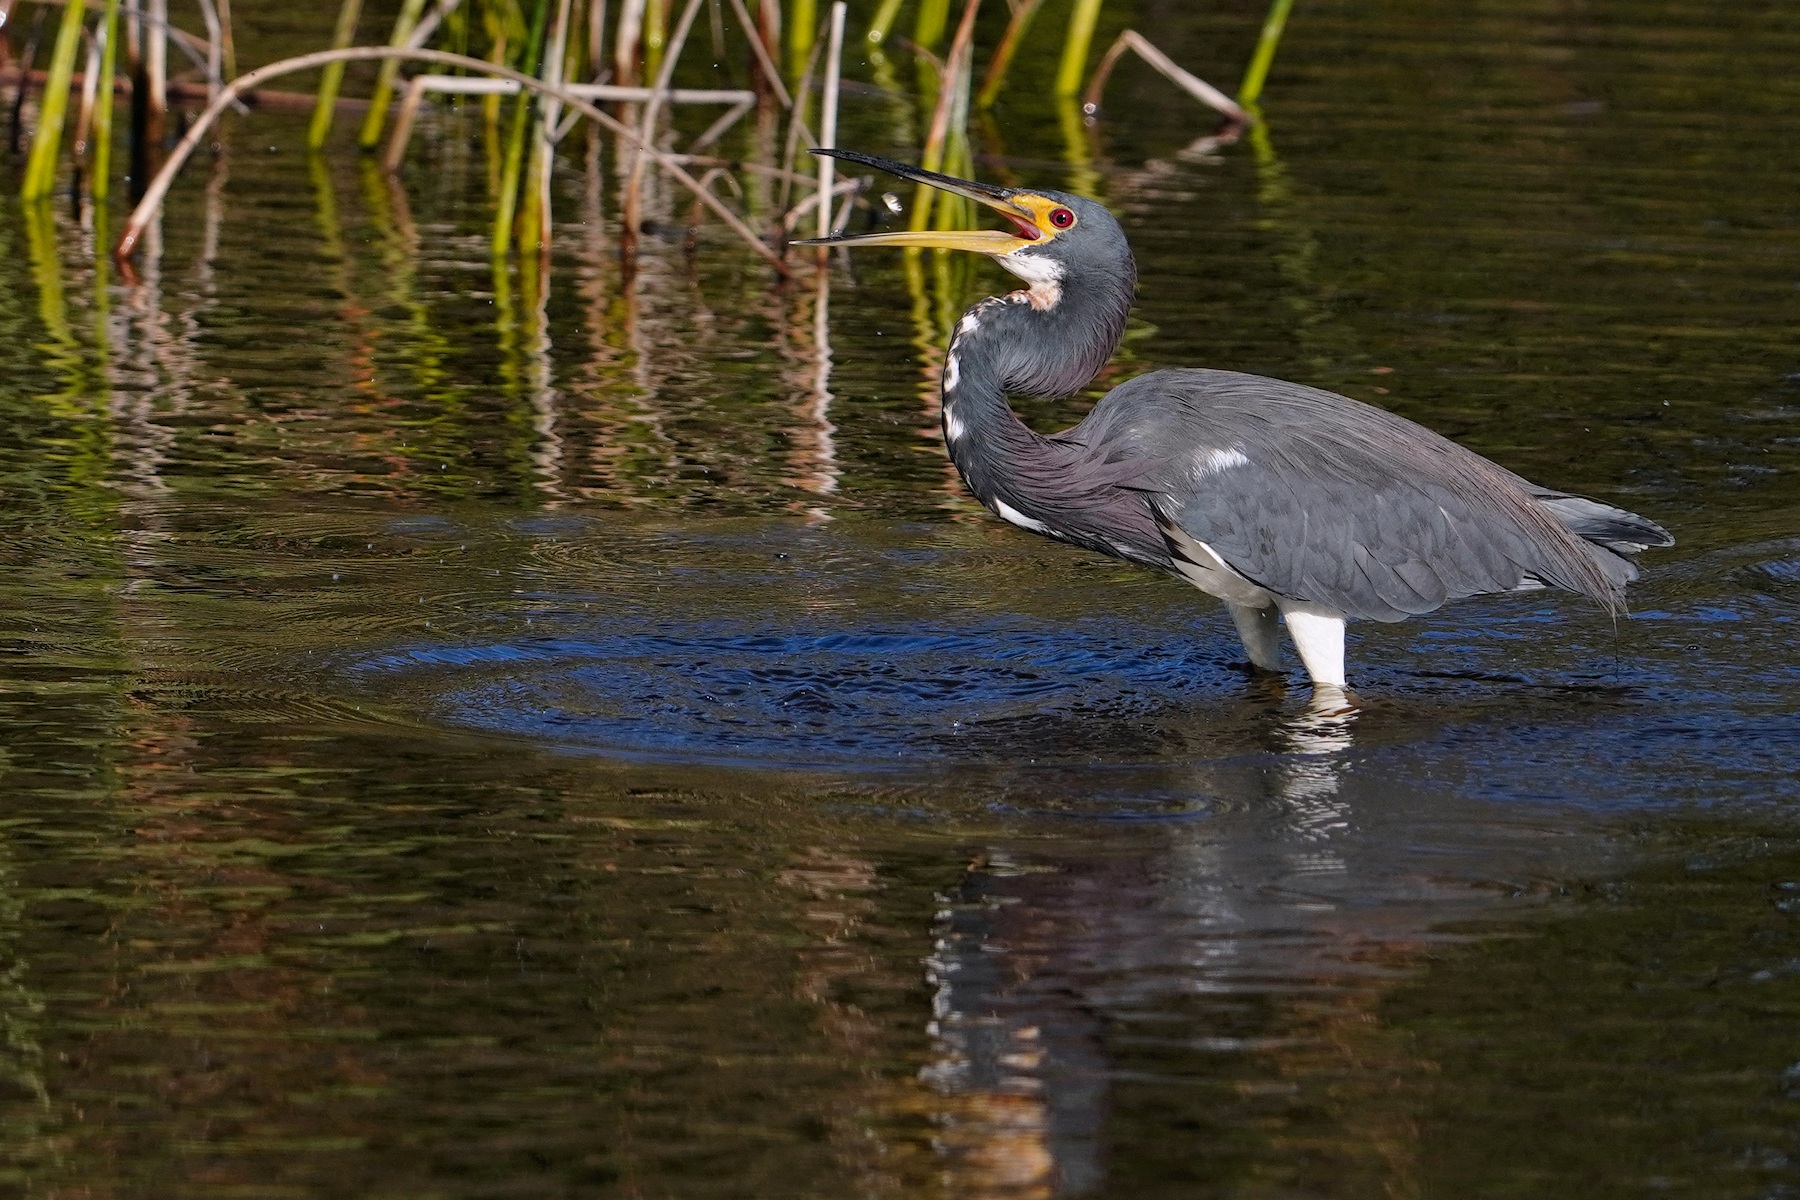 Tricolor heron tossing a fish